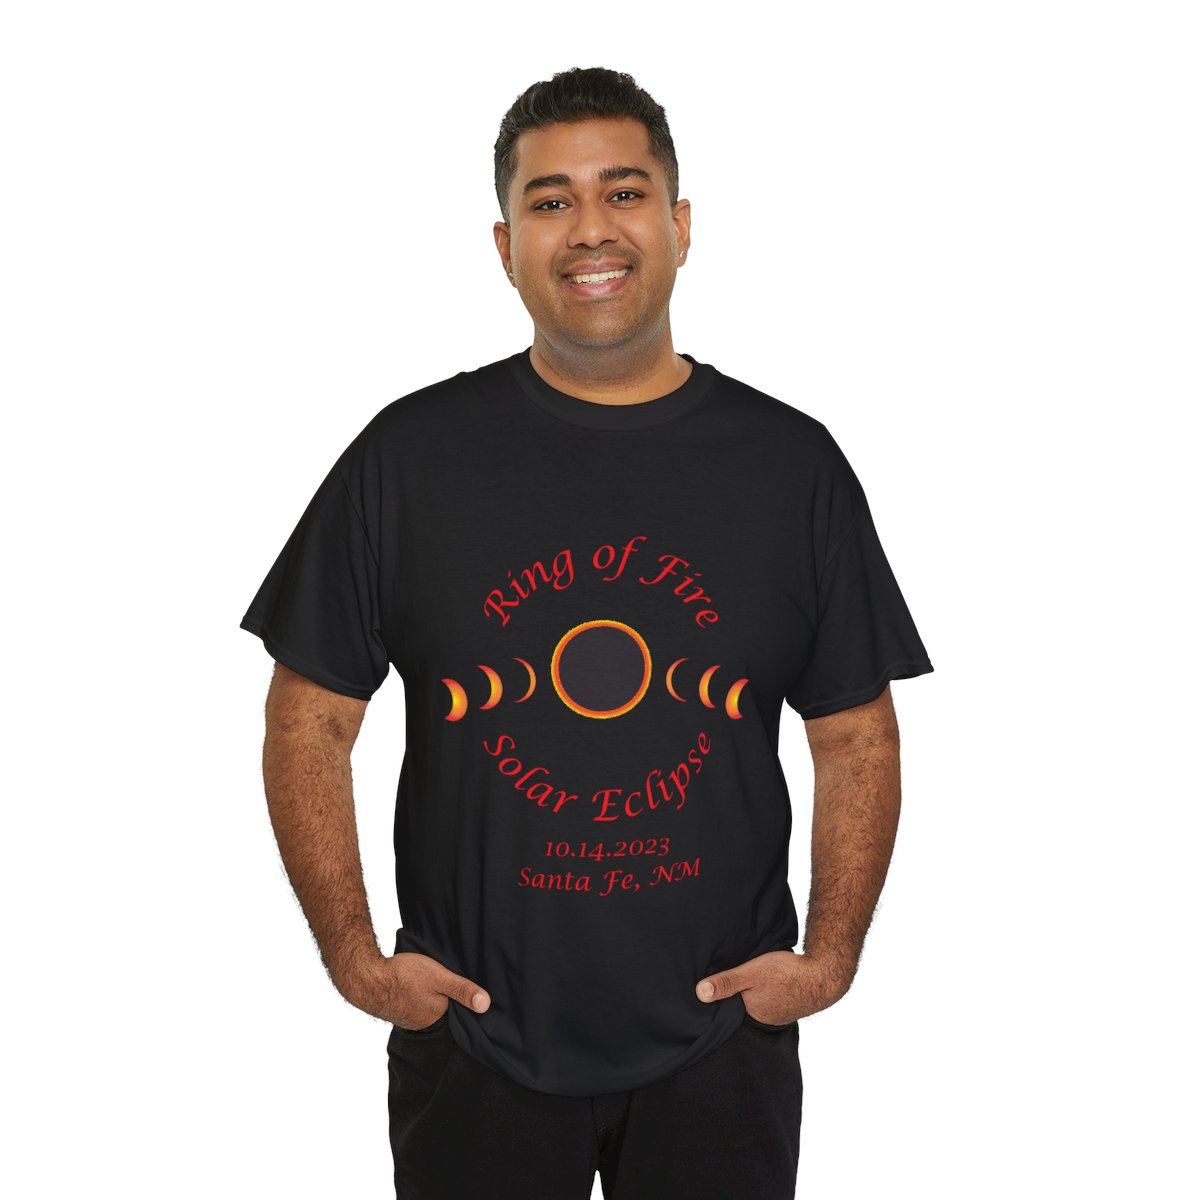 SALE! Santa Fe Treehouse Camp Ring of Fire T-shirt product main image